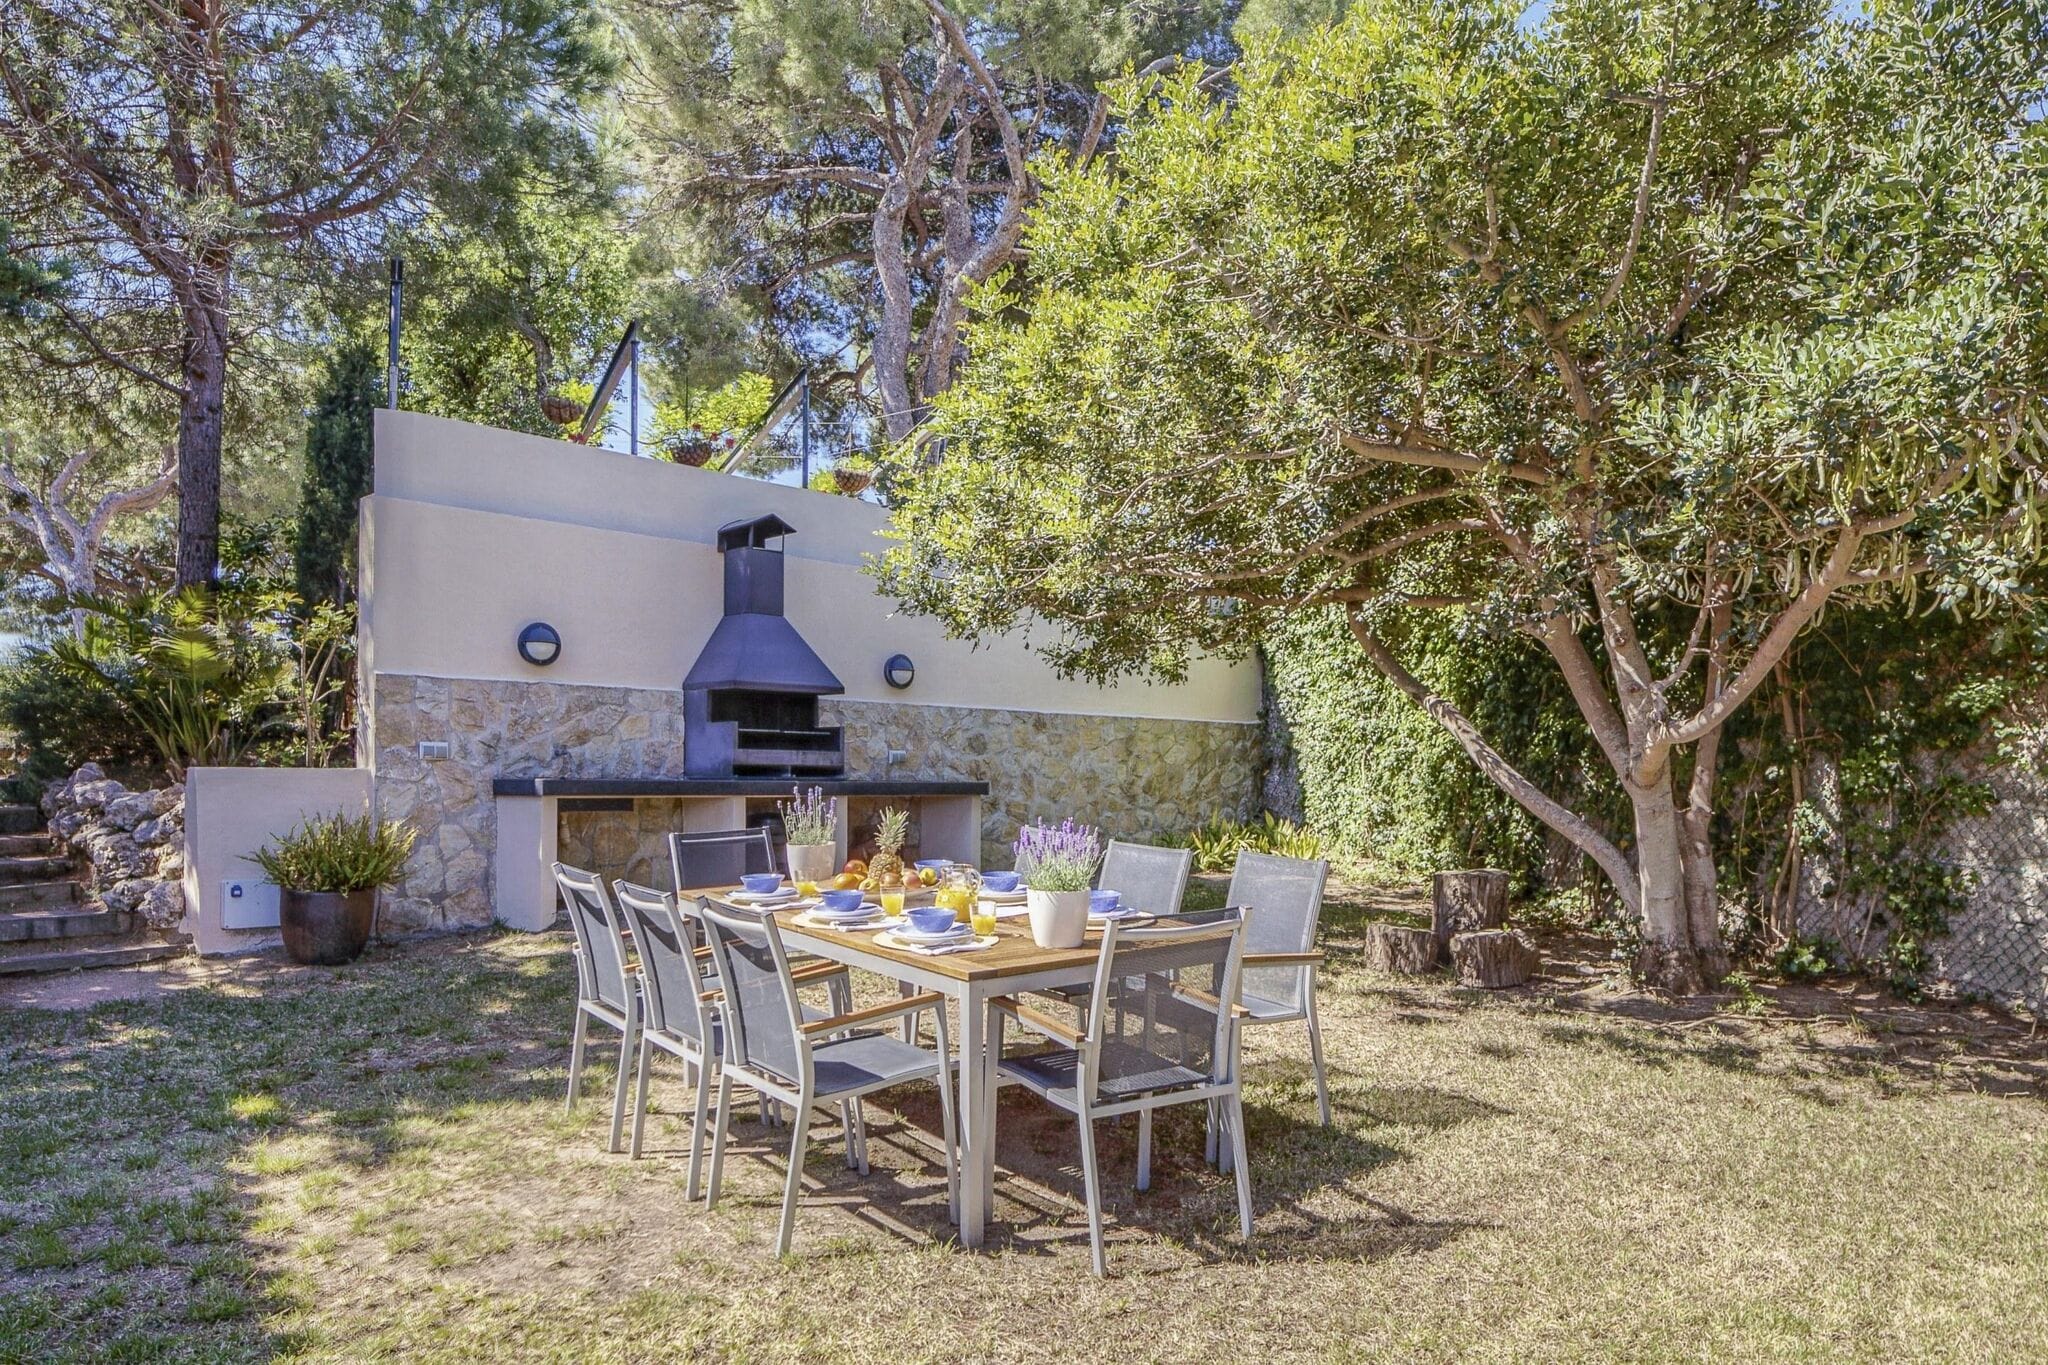 Cosy Villa in Arenys de Mar with Swimming Pool